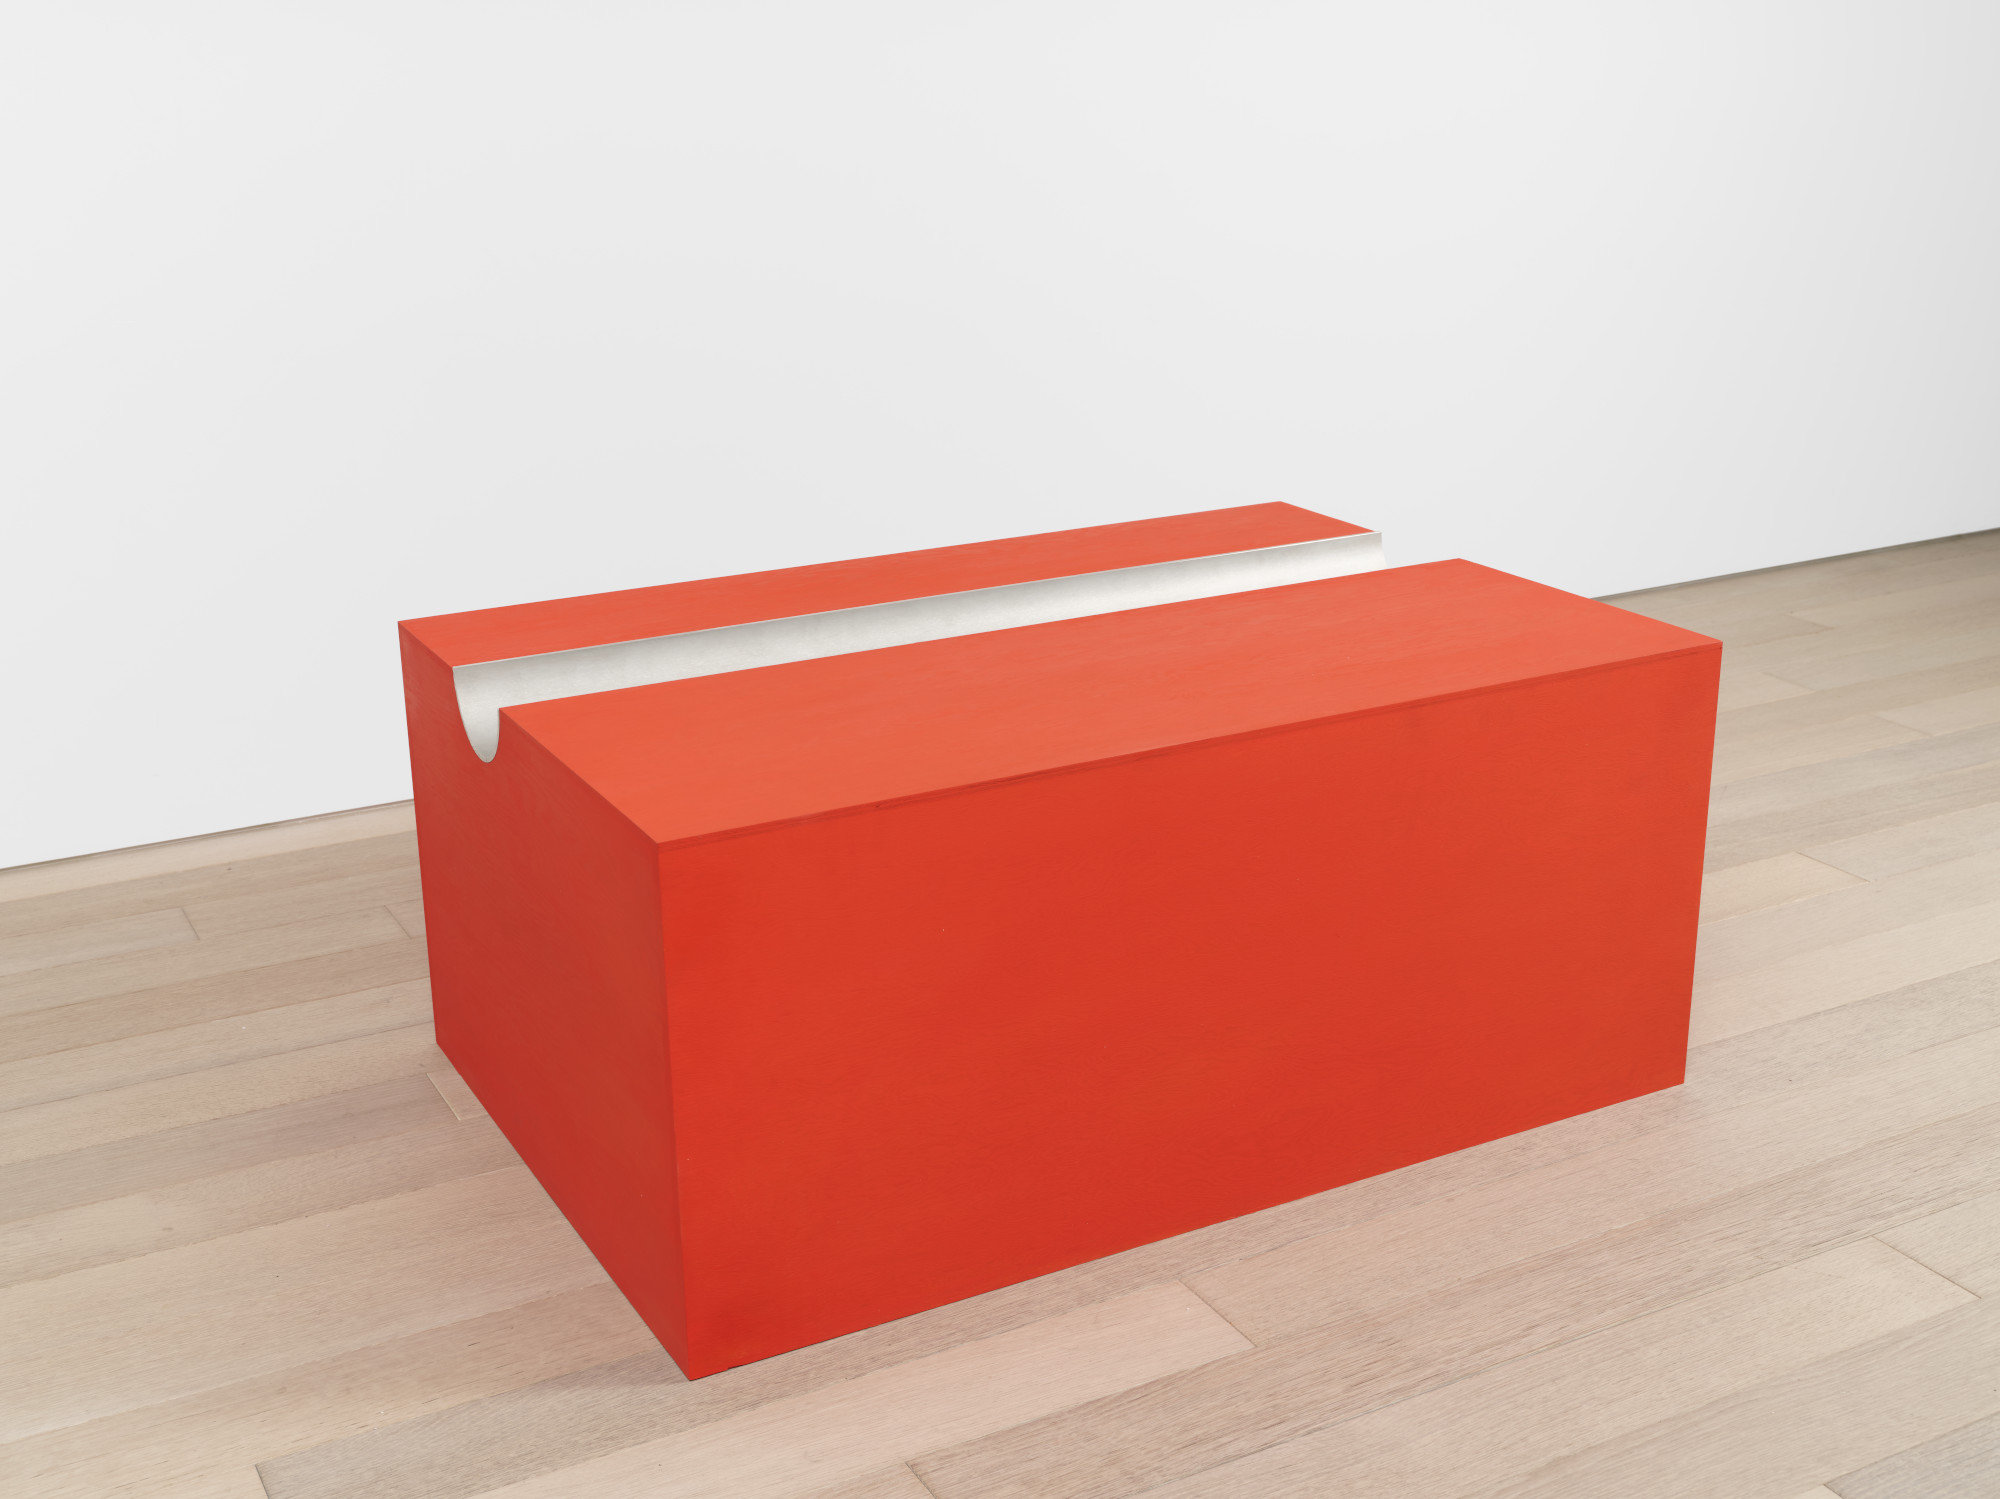 Exhibition Of Donald Judd Objects And Prints At The Gagosian New York